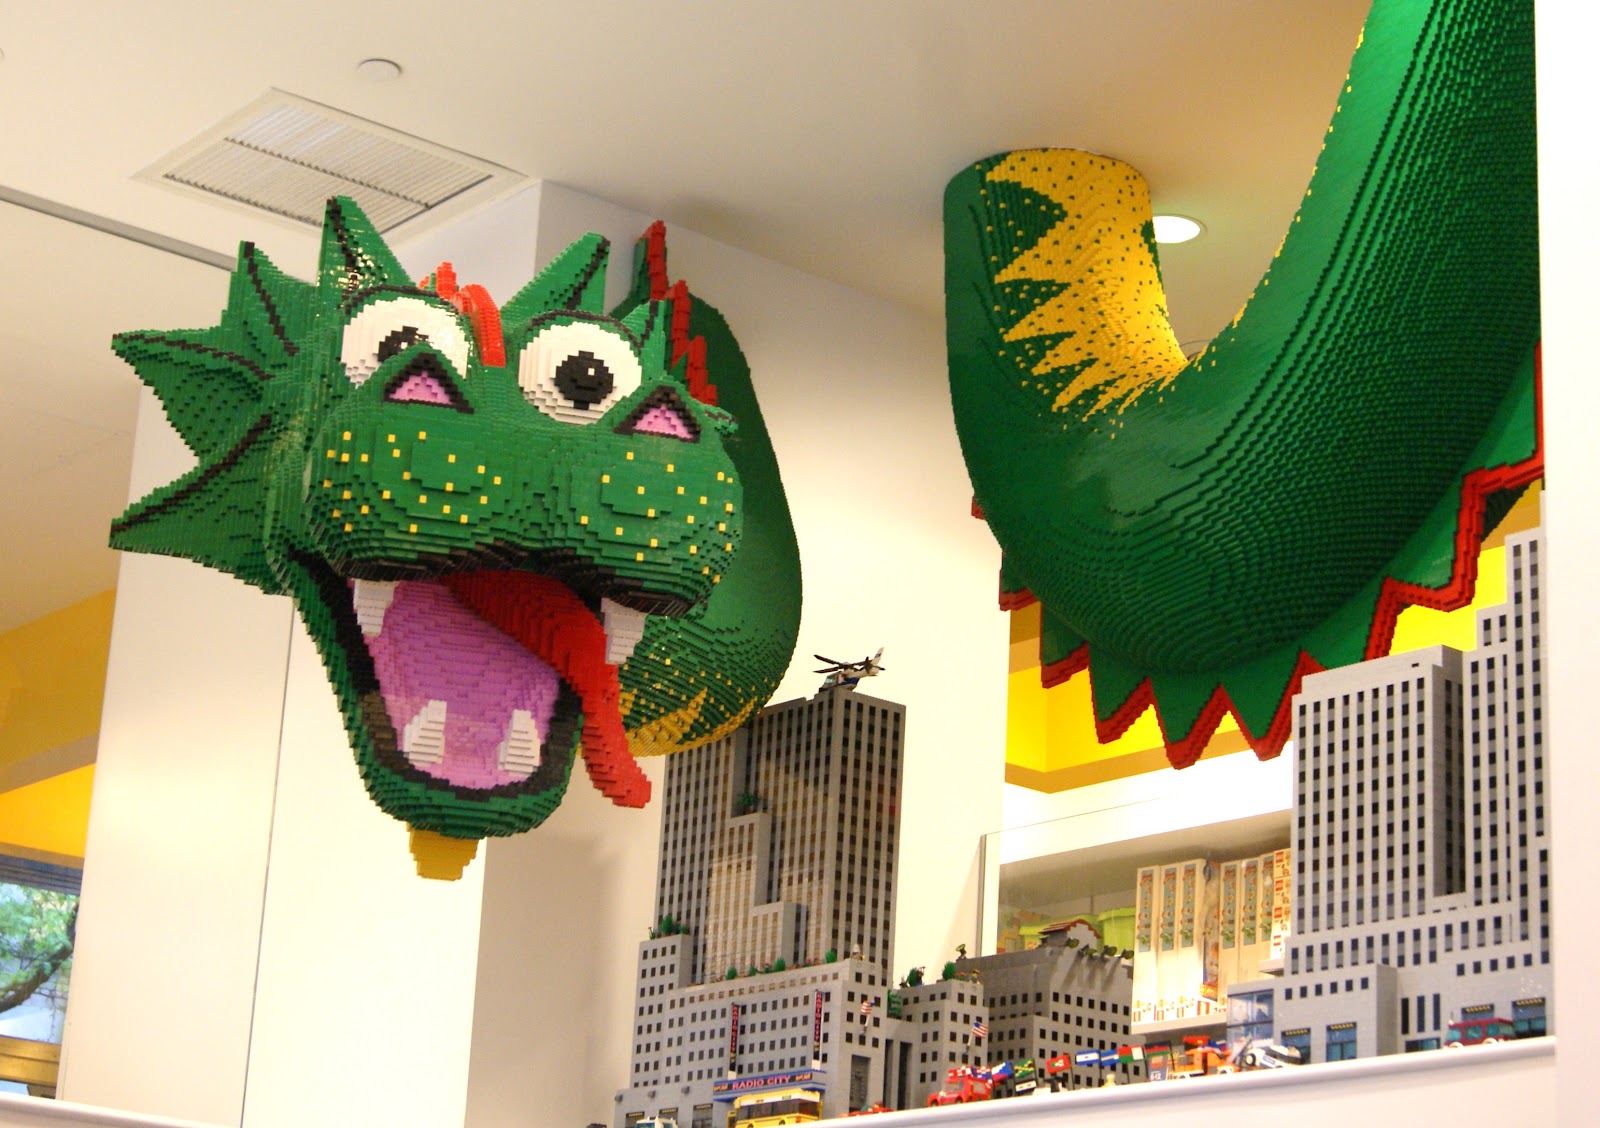 dragon+made+of+legos+at+lego+store+in+New+York+City+++gigantic+lego+sculpture.jpg